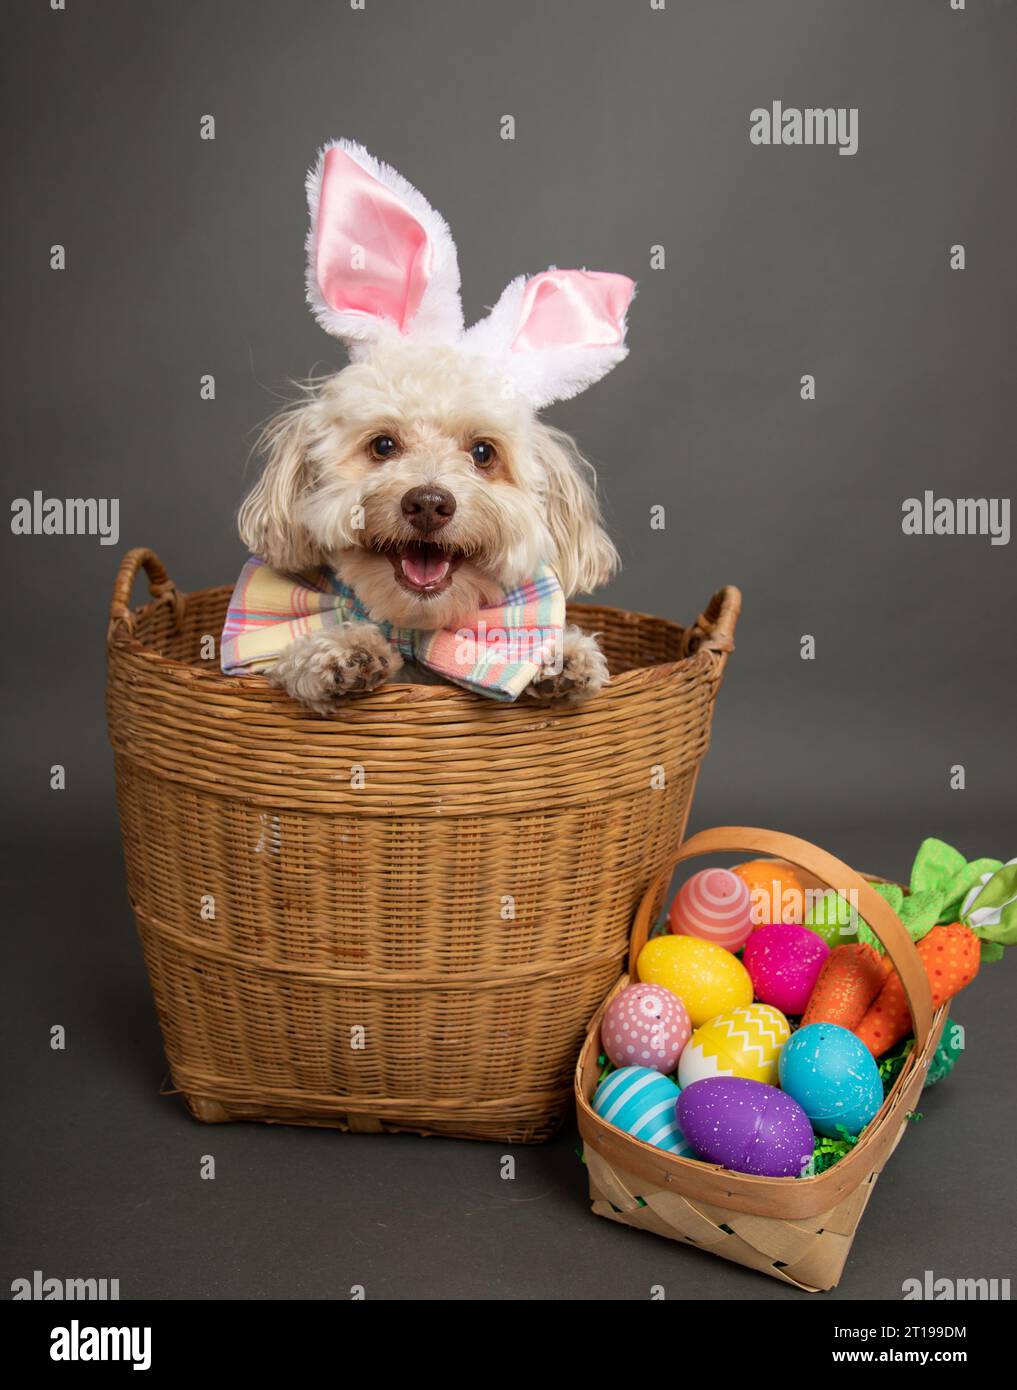 Miniature Havanese dog dressed as an Easter bunny sitting in a basket next to painted Easter eggs Stock Photo